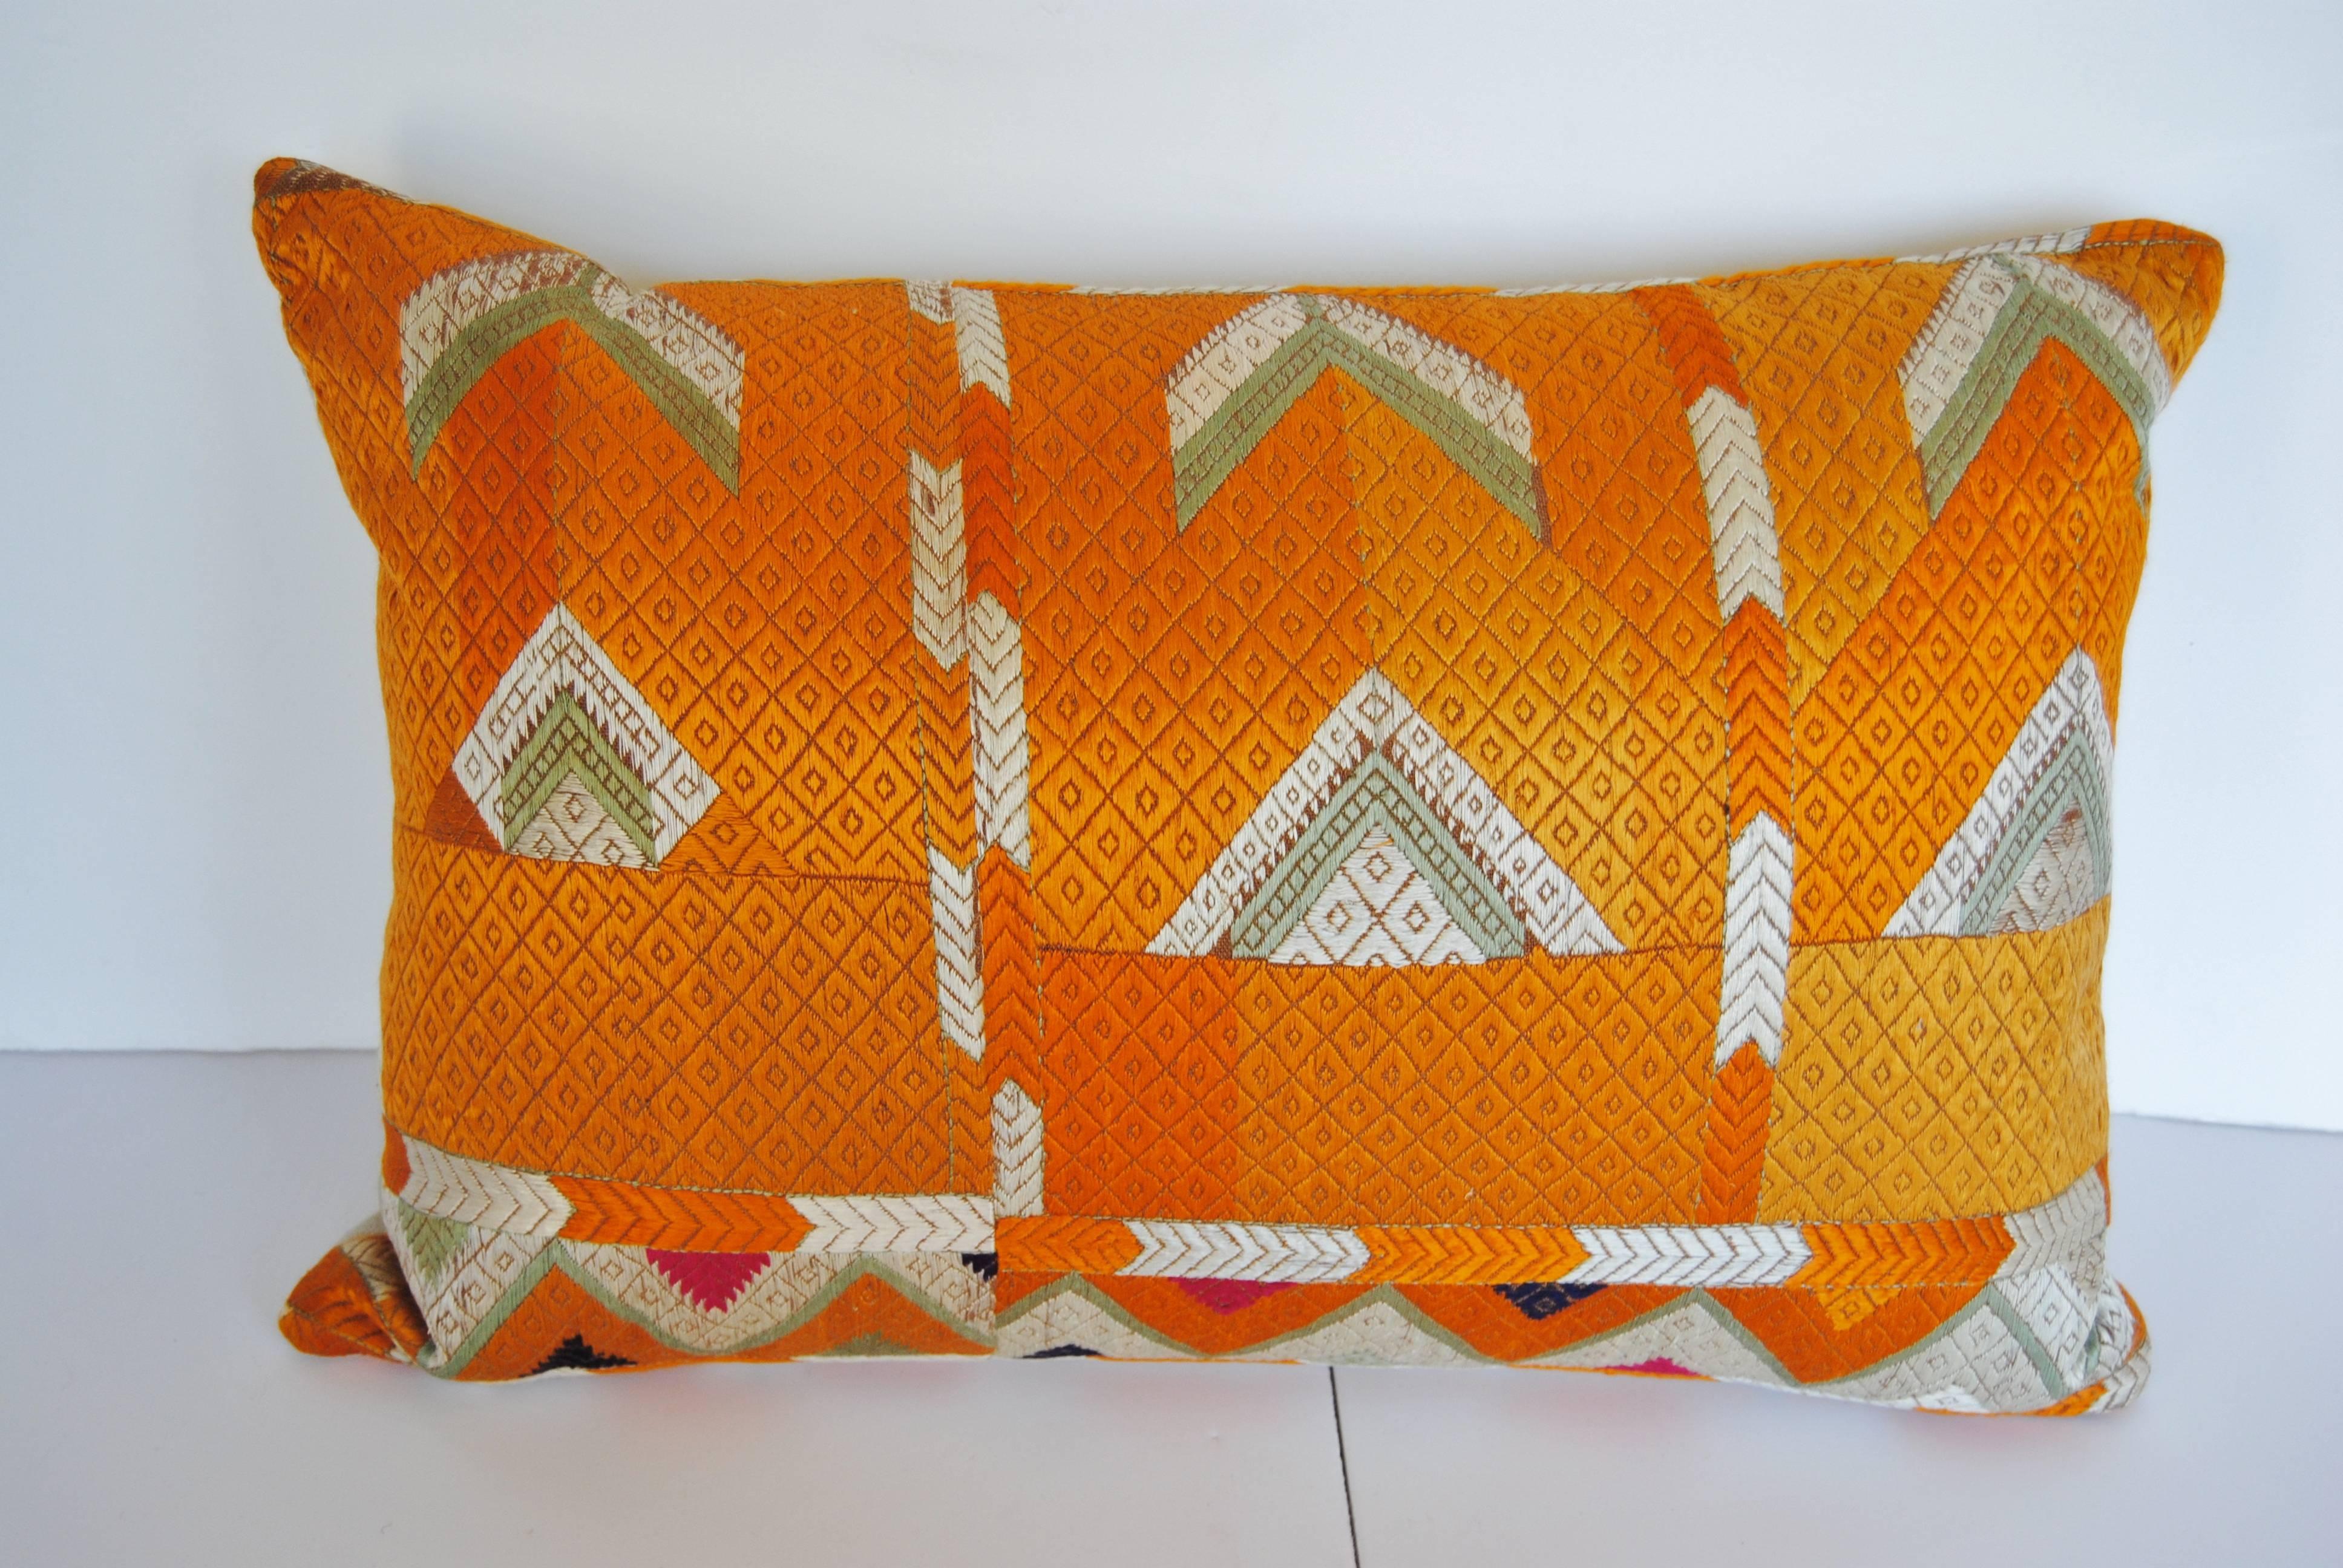 Custom pillow cut from a vintage Phulkari Bagh wedding shawl from Punjab, India. Hand embroidered in vibrant silk threads by the bride's family for her wedding. The pillow is backed in ivory silk, filled with an insert of 50/50 down and feathers and